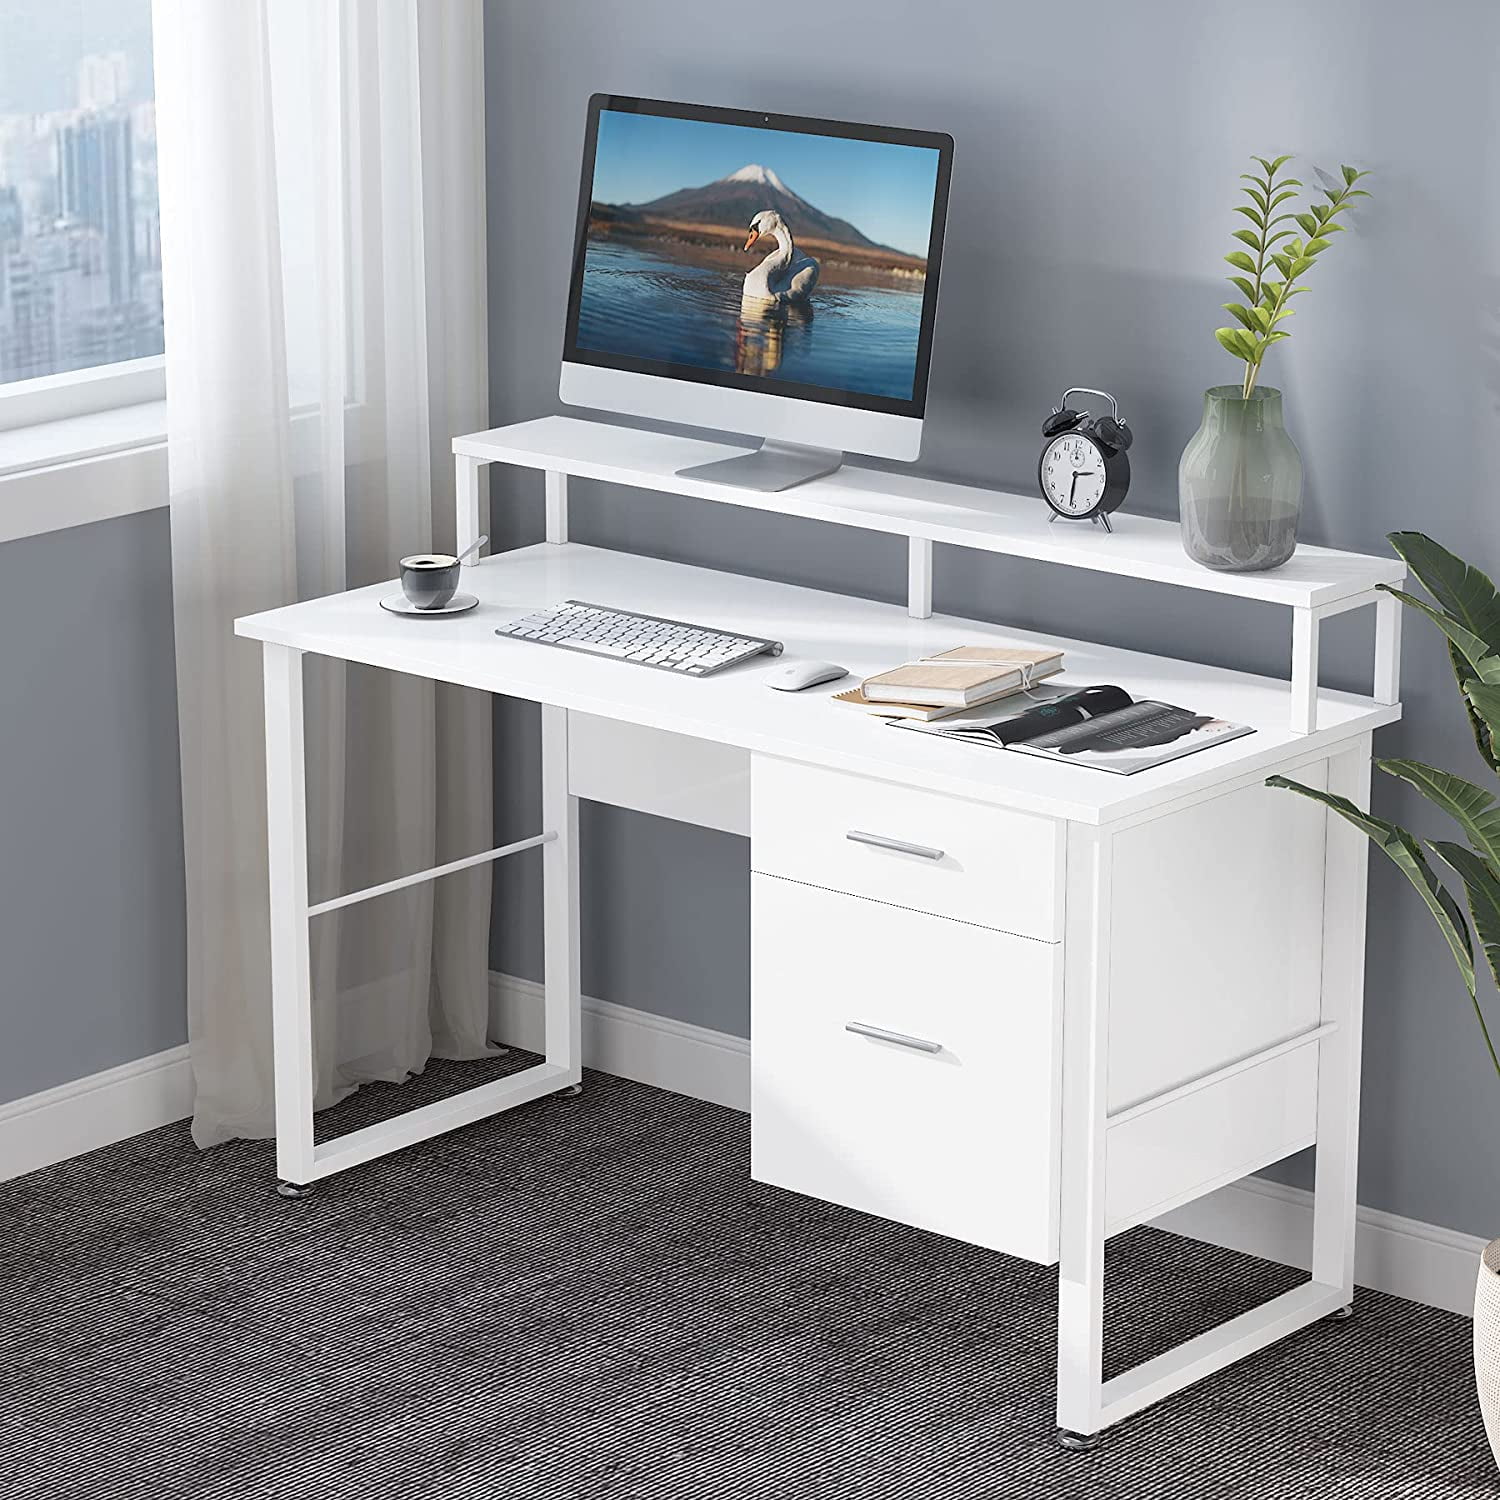 Details about   Wood Computer Desk With 3 Drawers Shelf PC Laptop Office Table Home  Desks  US 